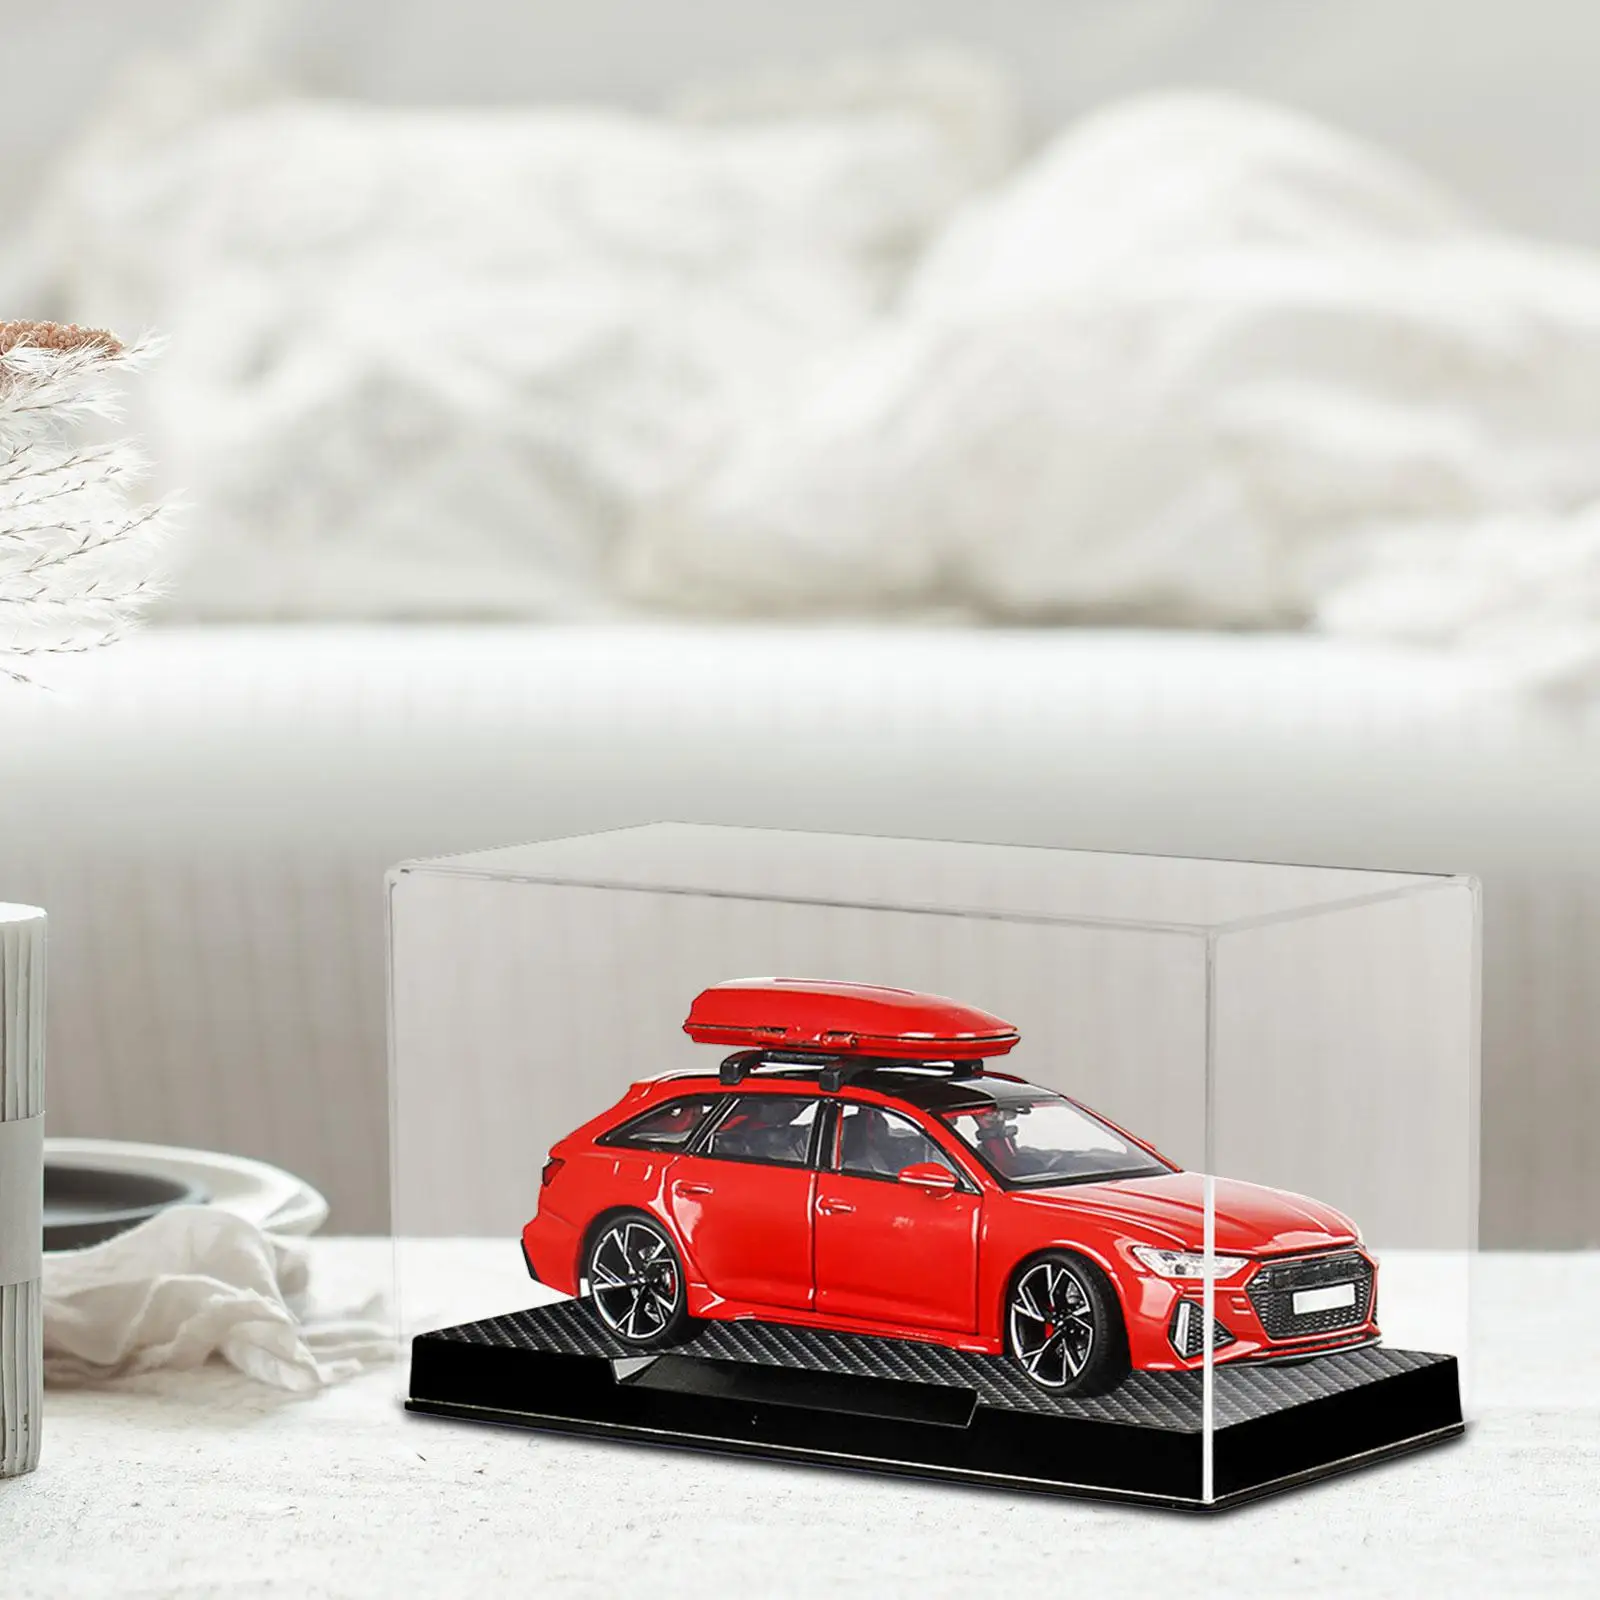 Acrylic Clear Display Case Dustproof Storage Box for Boy 1:32 Scale Model Cars Showcase for Collectibles Miniature Figurines Boy